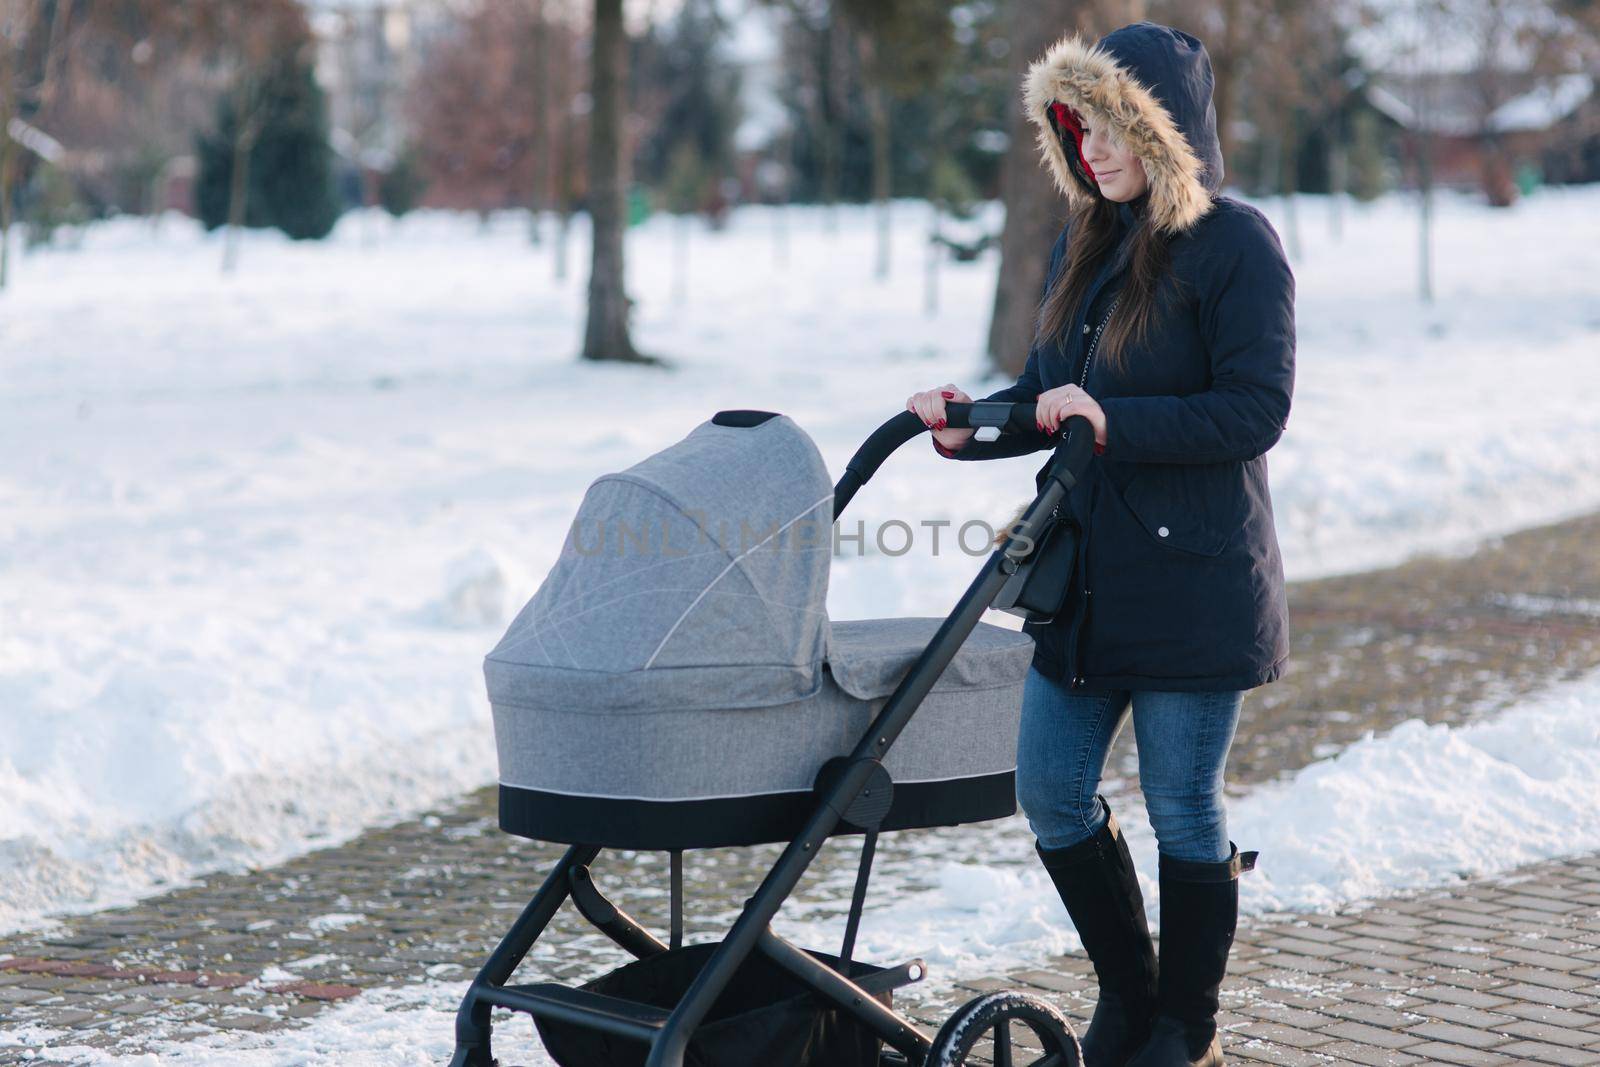 Beautiful mother walking in the park with her little baby in stoller. Woman dressed in blue jaket with hood and jeans. Warm boots.